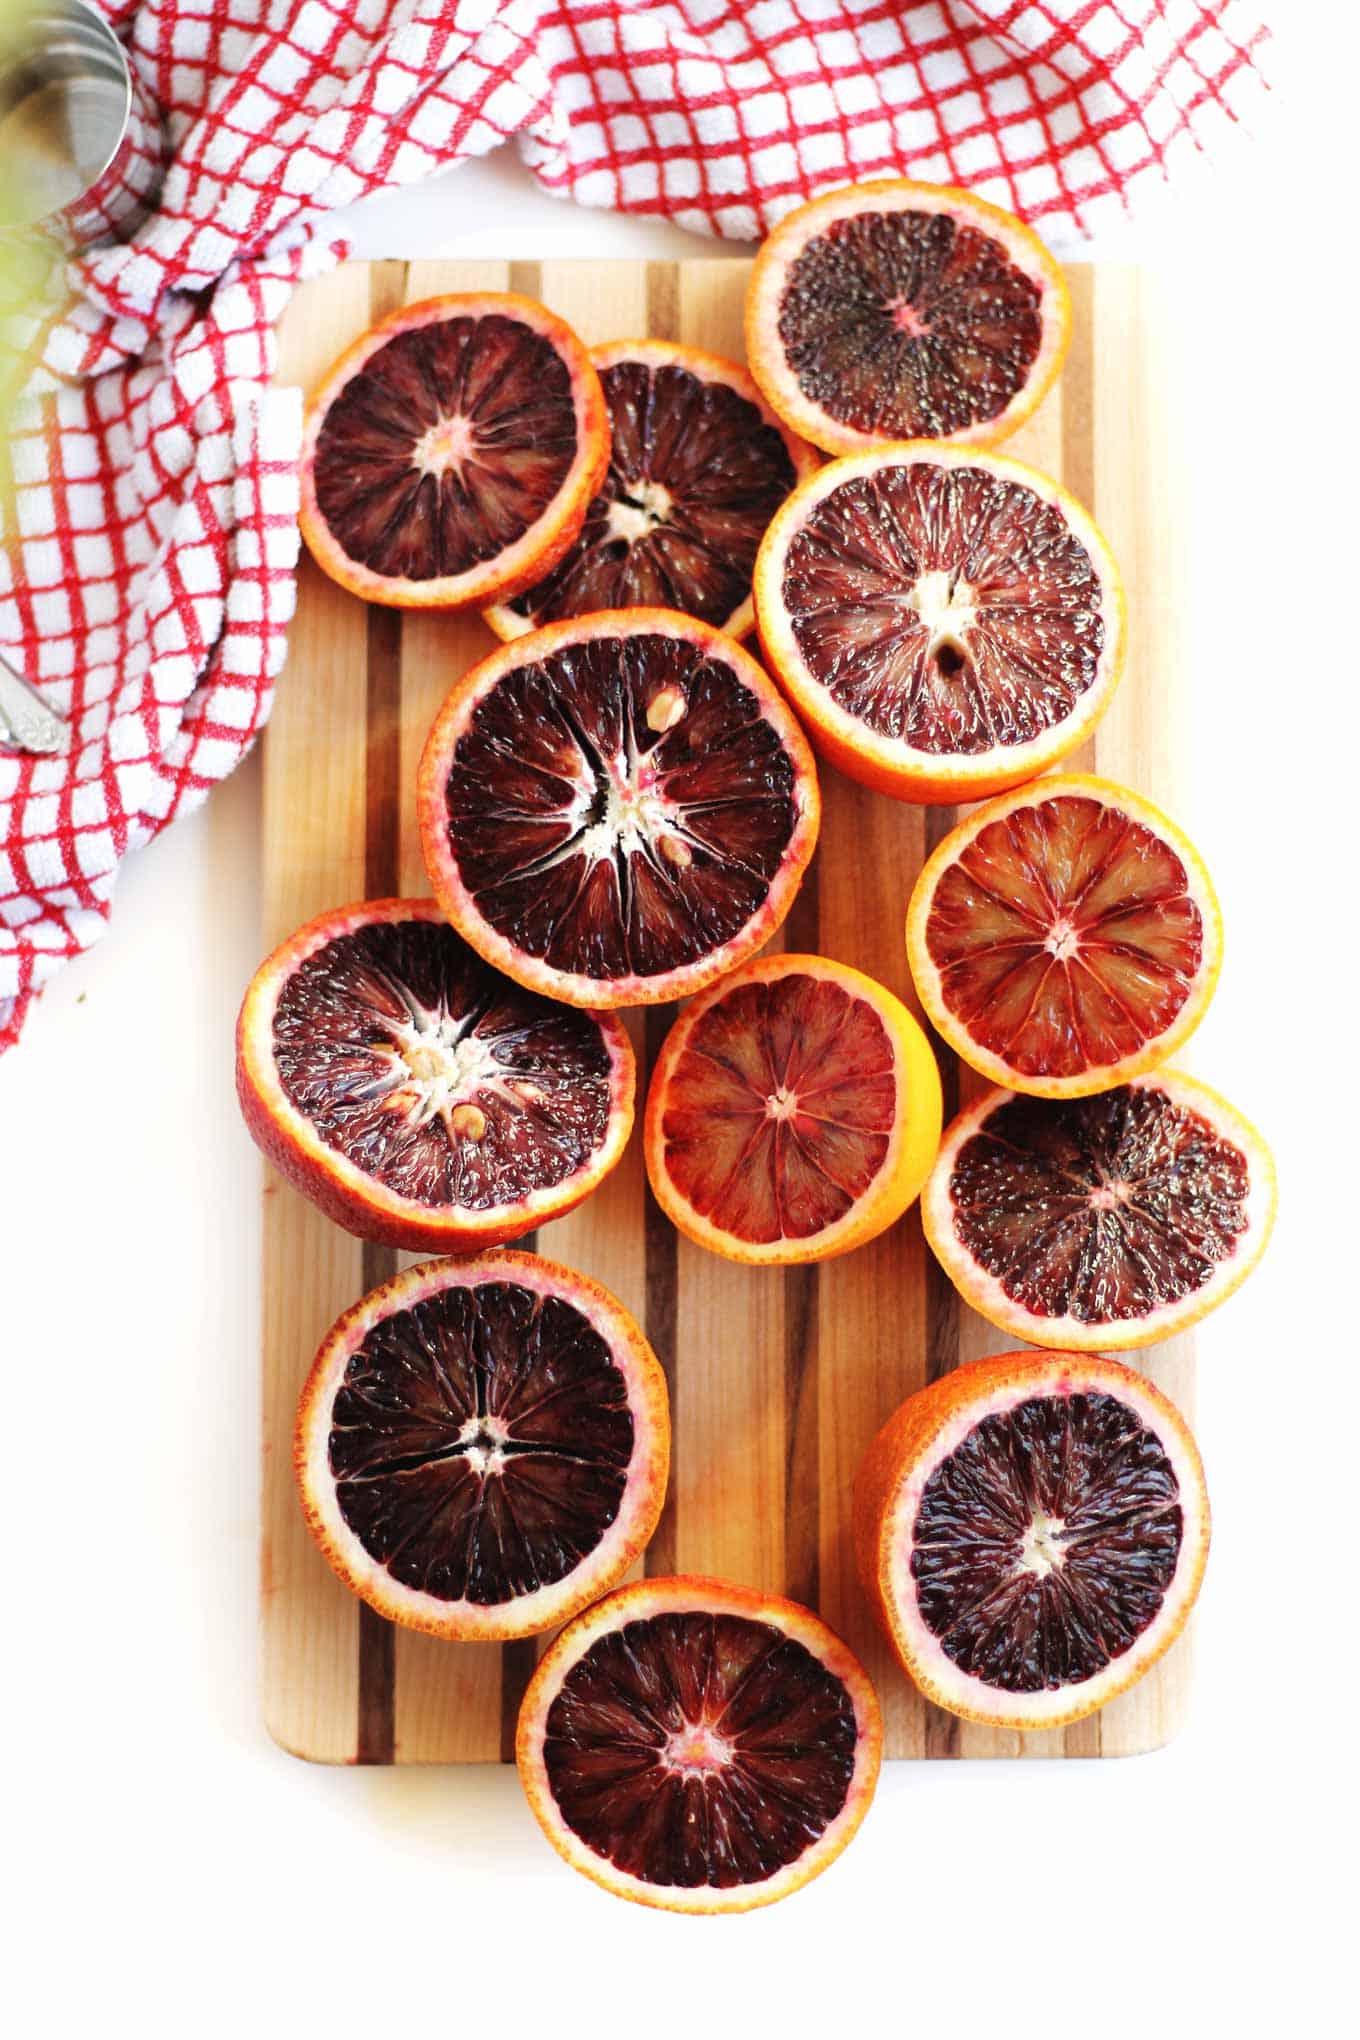 A photo of blood oranges cut in half and on a wooden cutting board